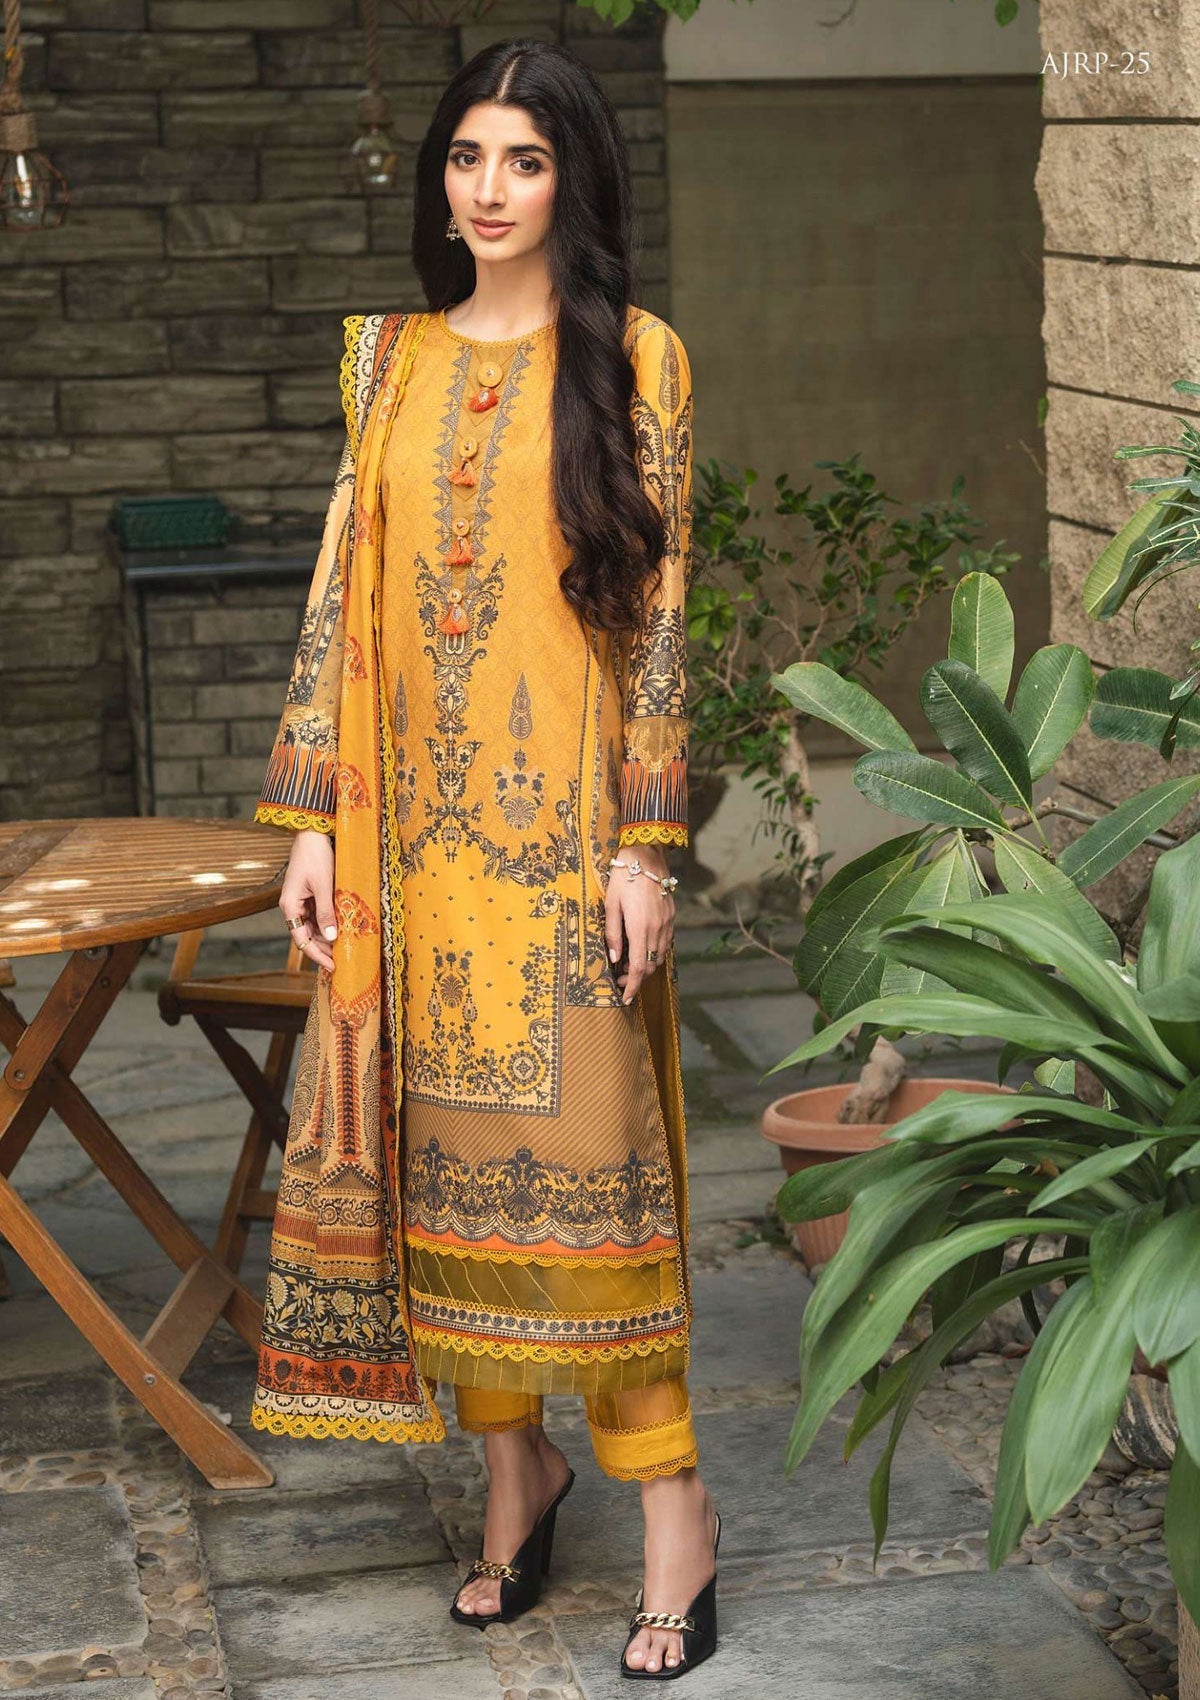 Lawn Collection - Asim Jofa - Rania - AJRP#25 available at Saleem Fabrics Traditions